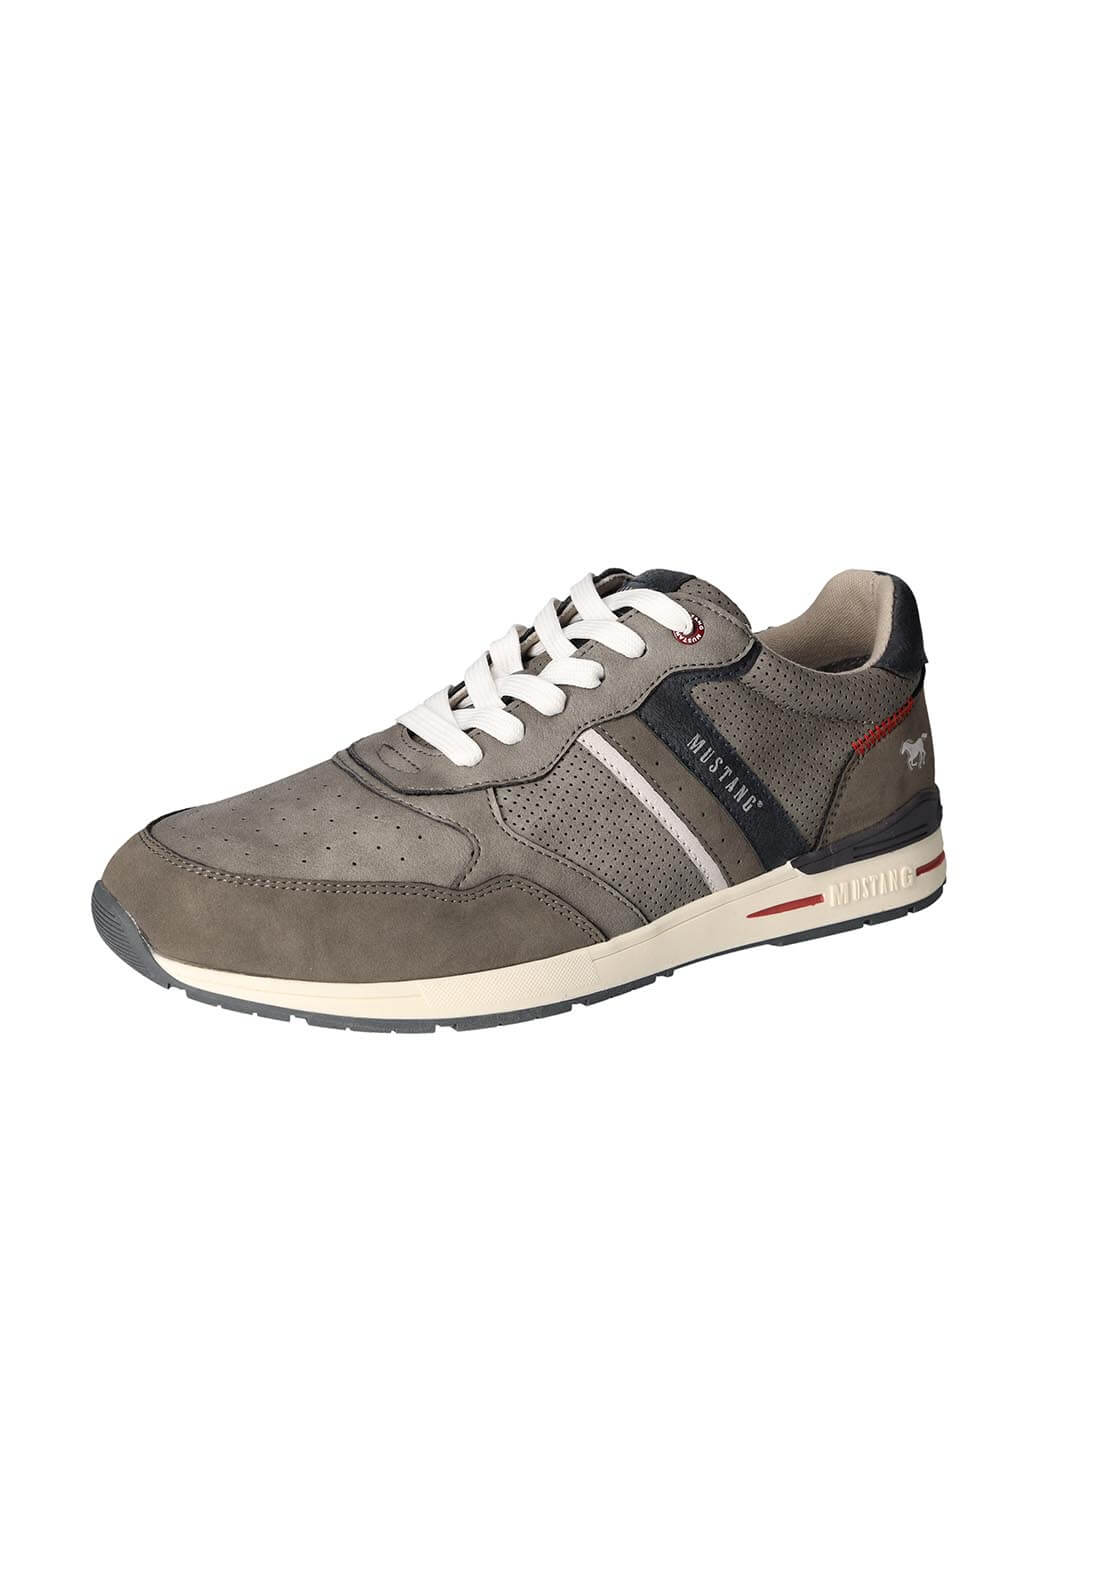 Mustang Trainer - Grey 1 Shaws Department Stores